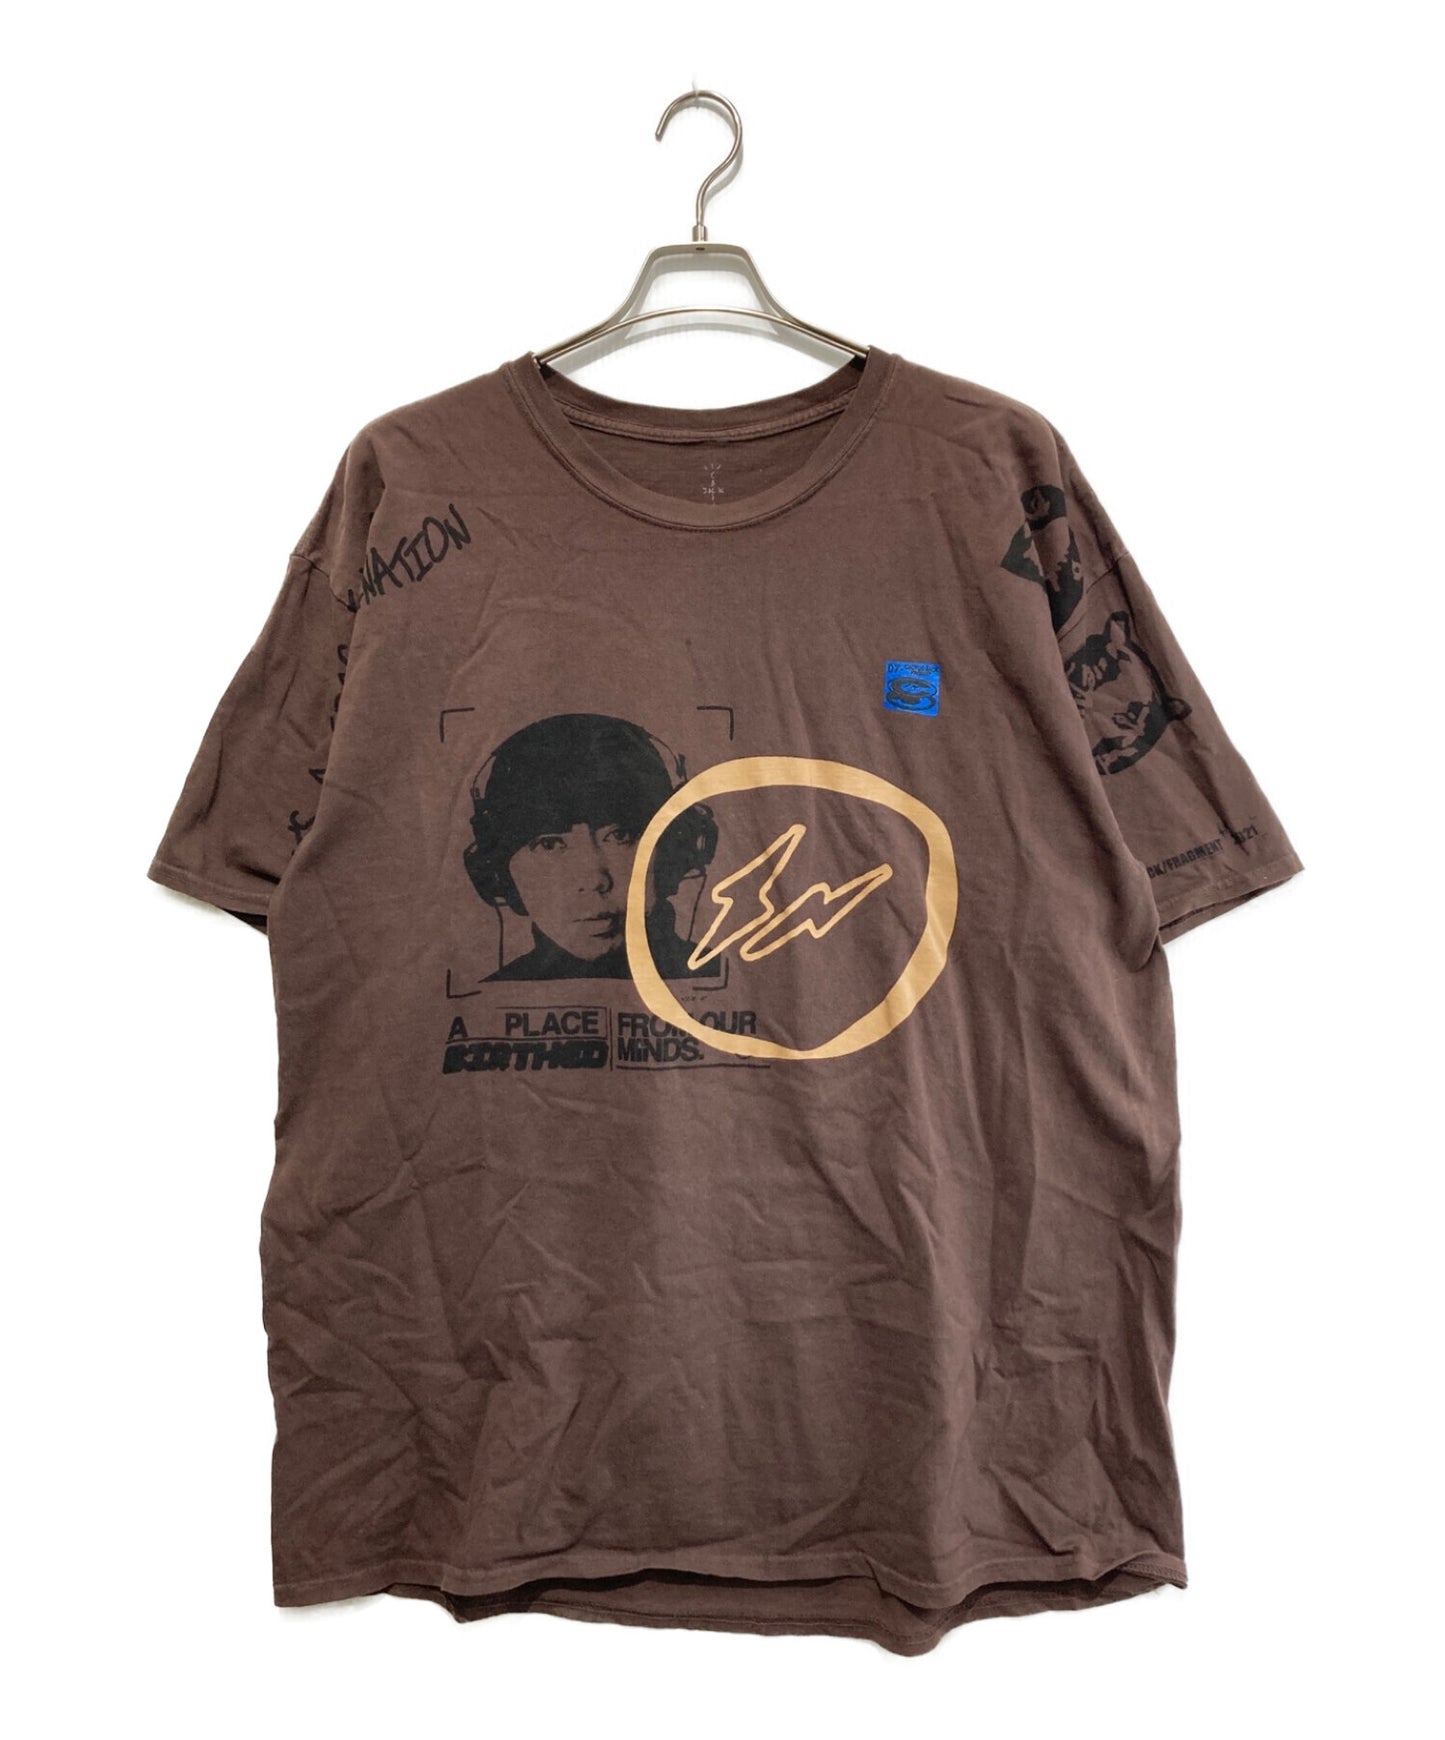 [Pre-owned] FRAGMENT DESIGN x Cactus Jack HIROSHI TEE / T-shirt / Short-sleeved cut and sewn